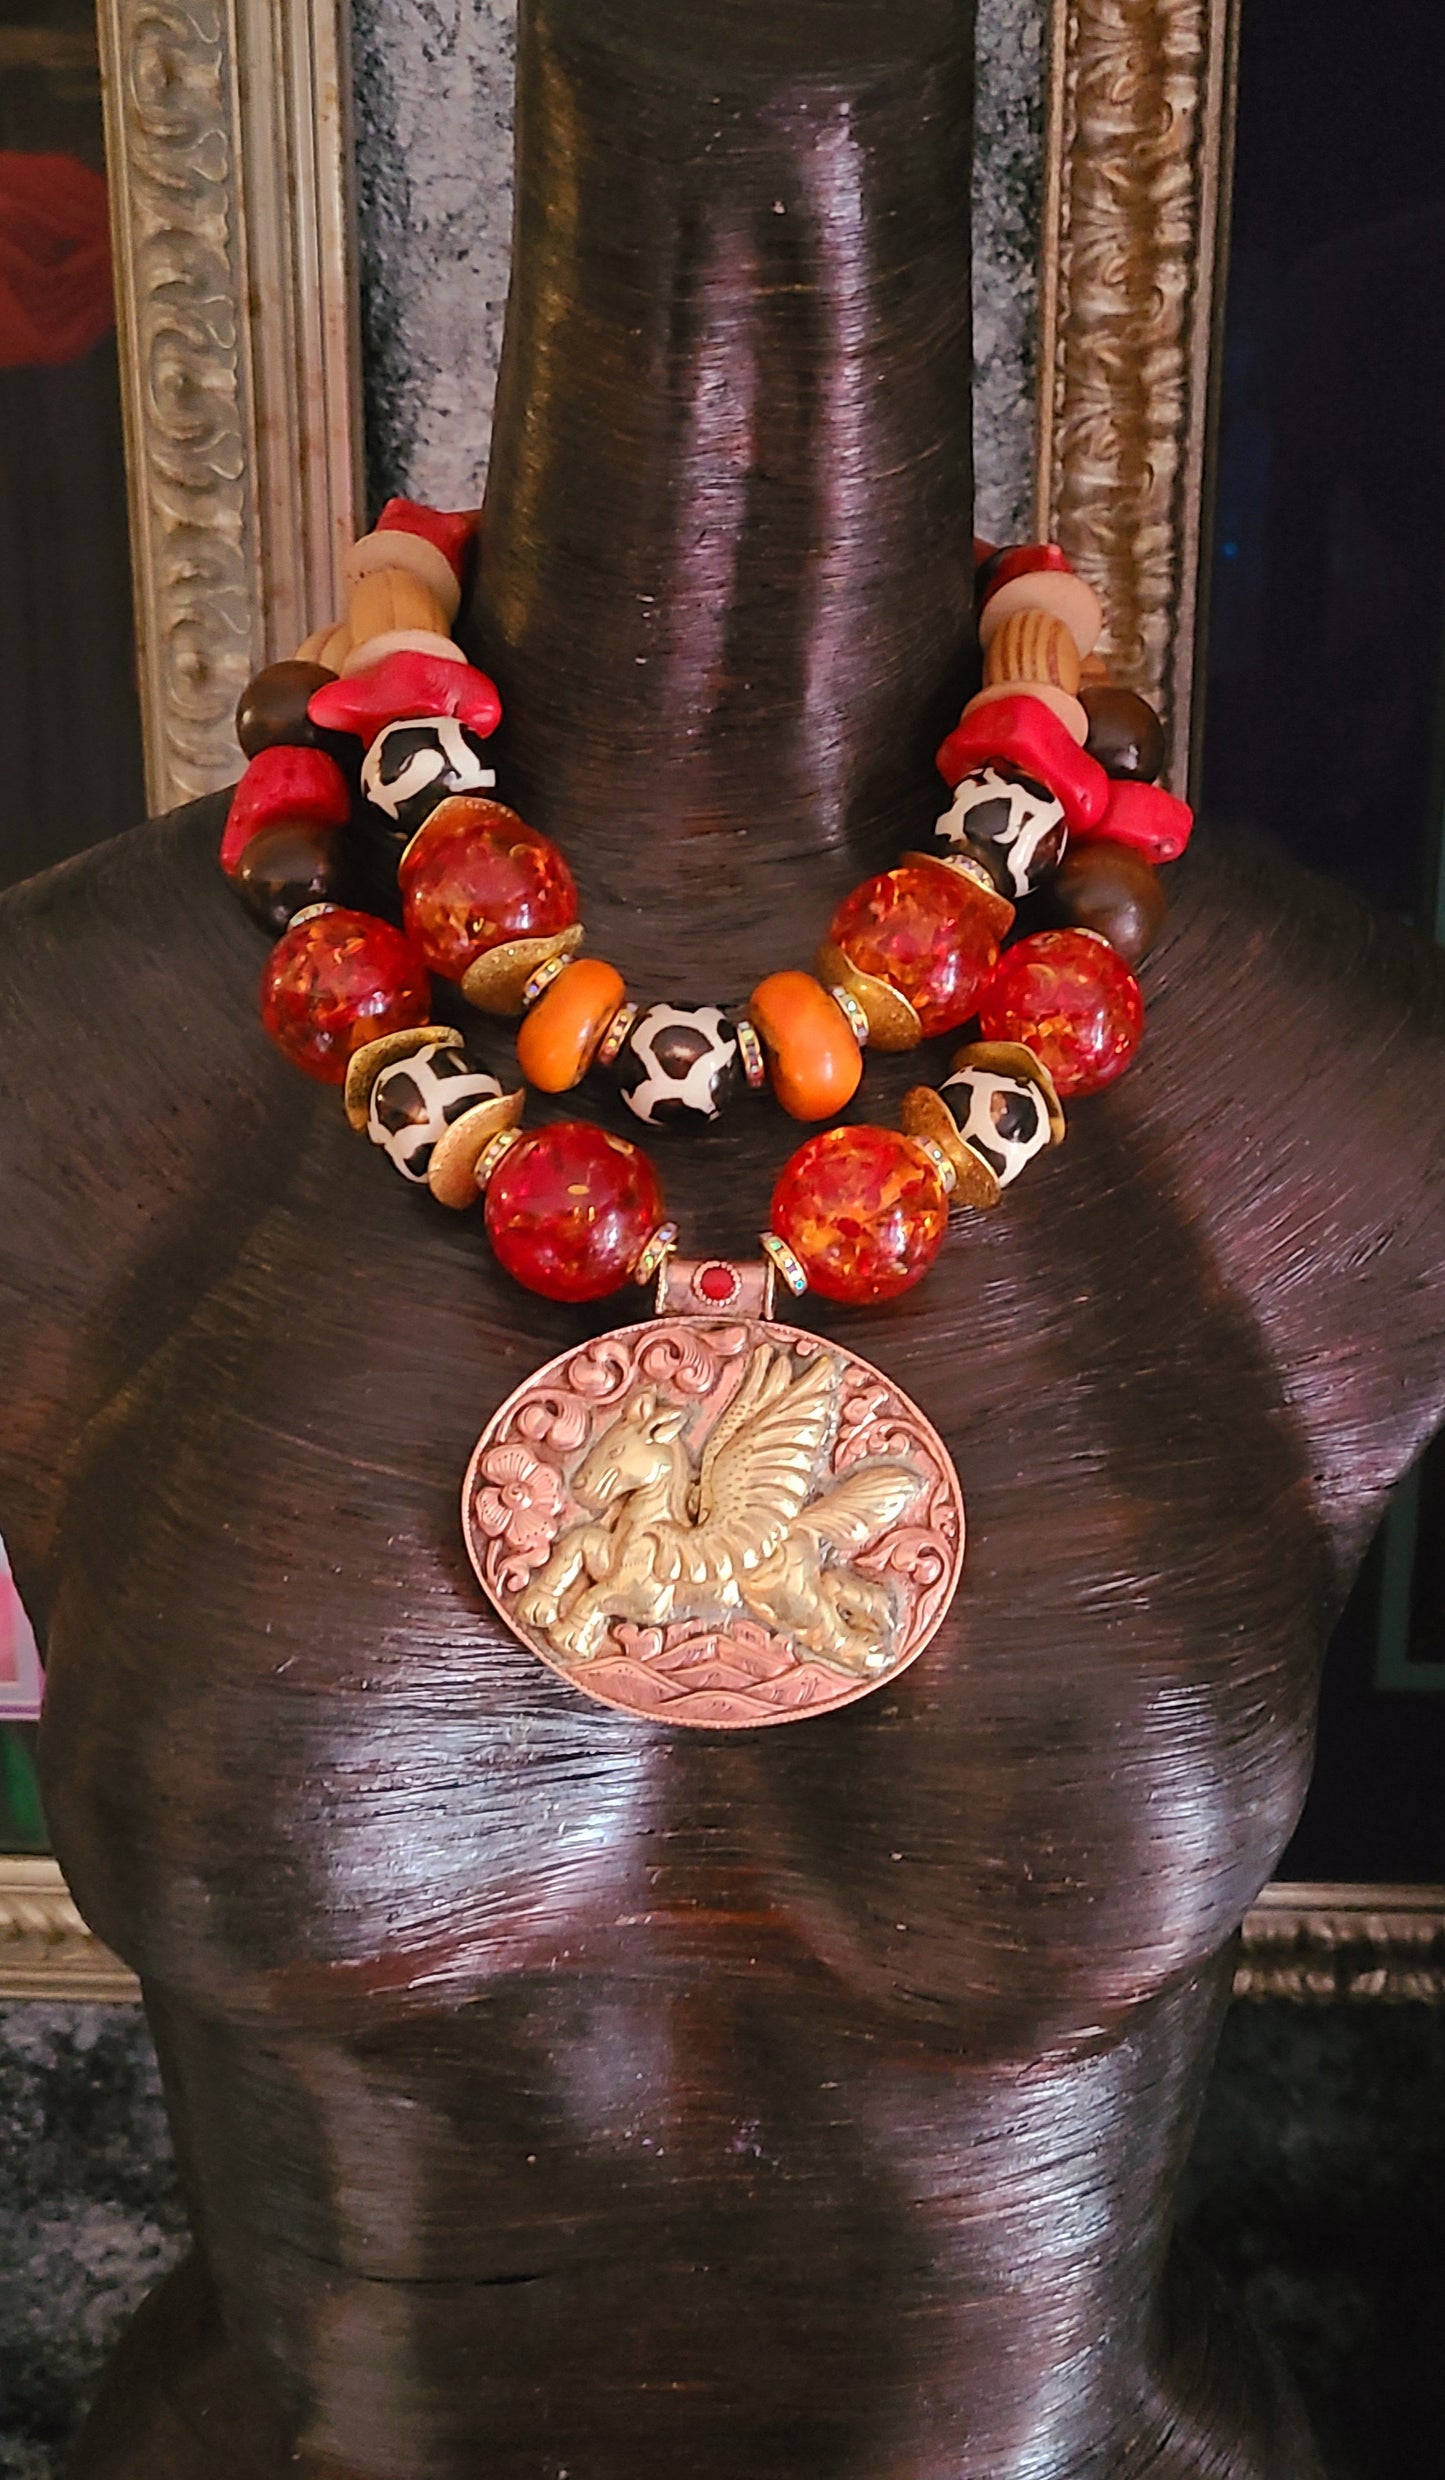 Faux Amber Tribal Beaded Statement Necklace With Tibetan Brass Repousse Pegasus Pendant